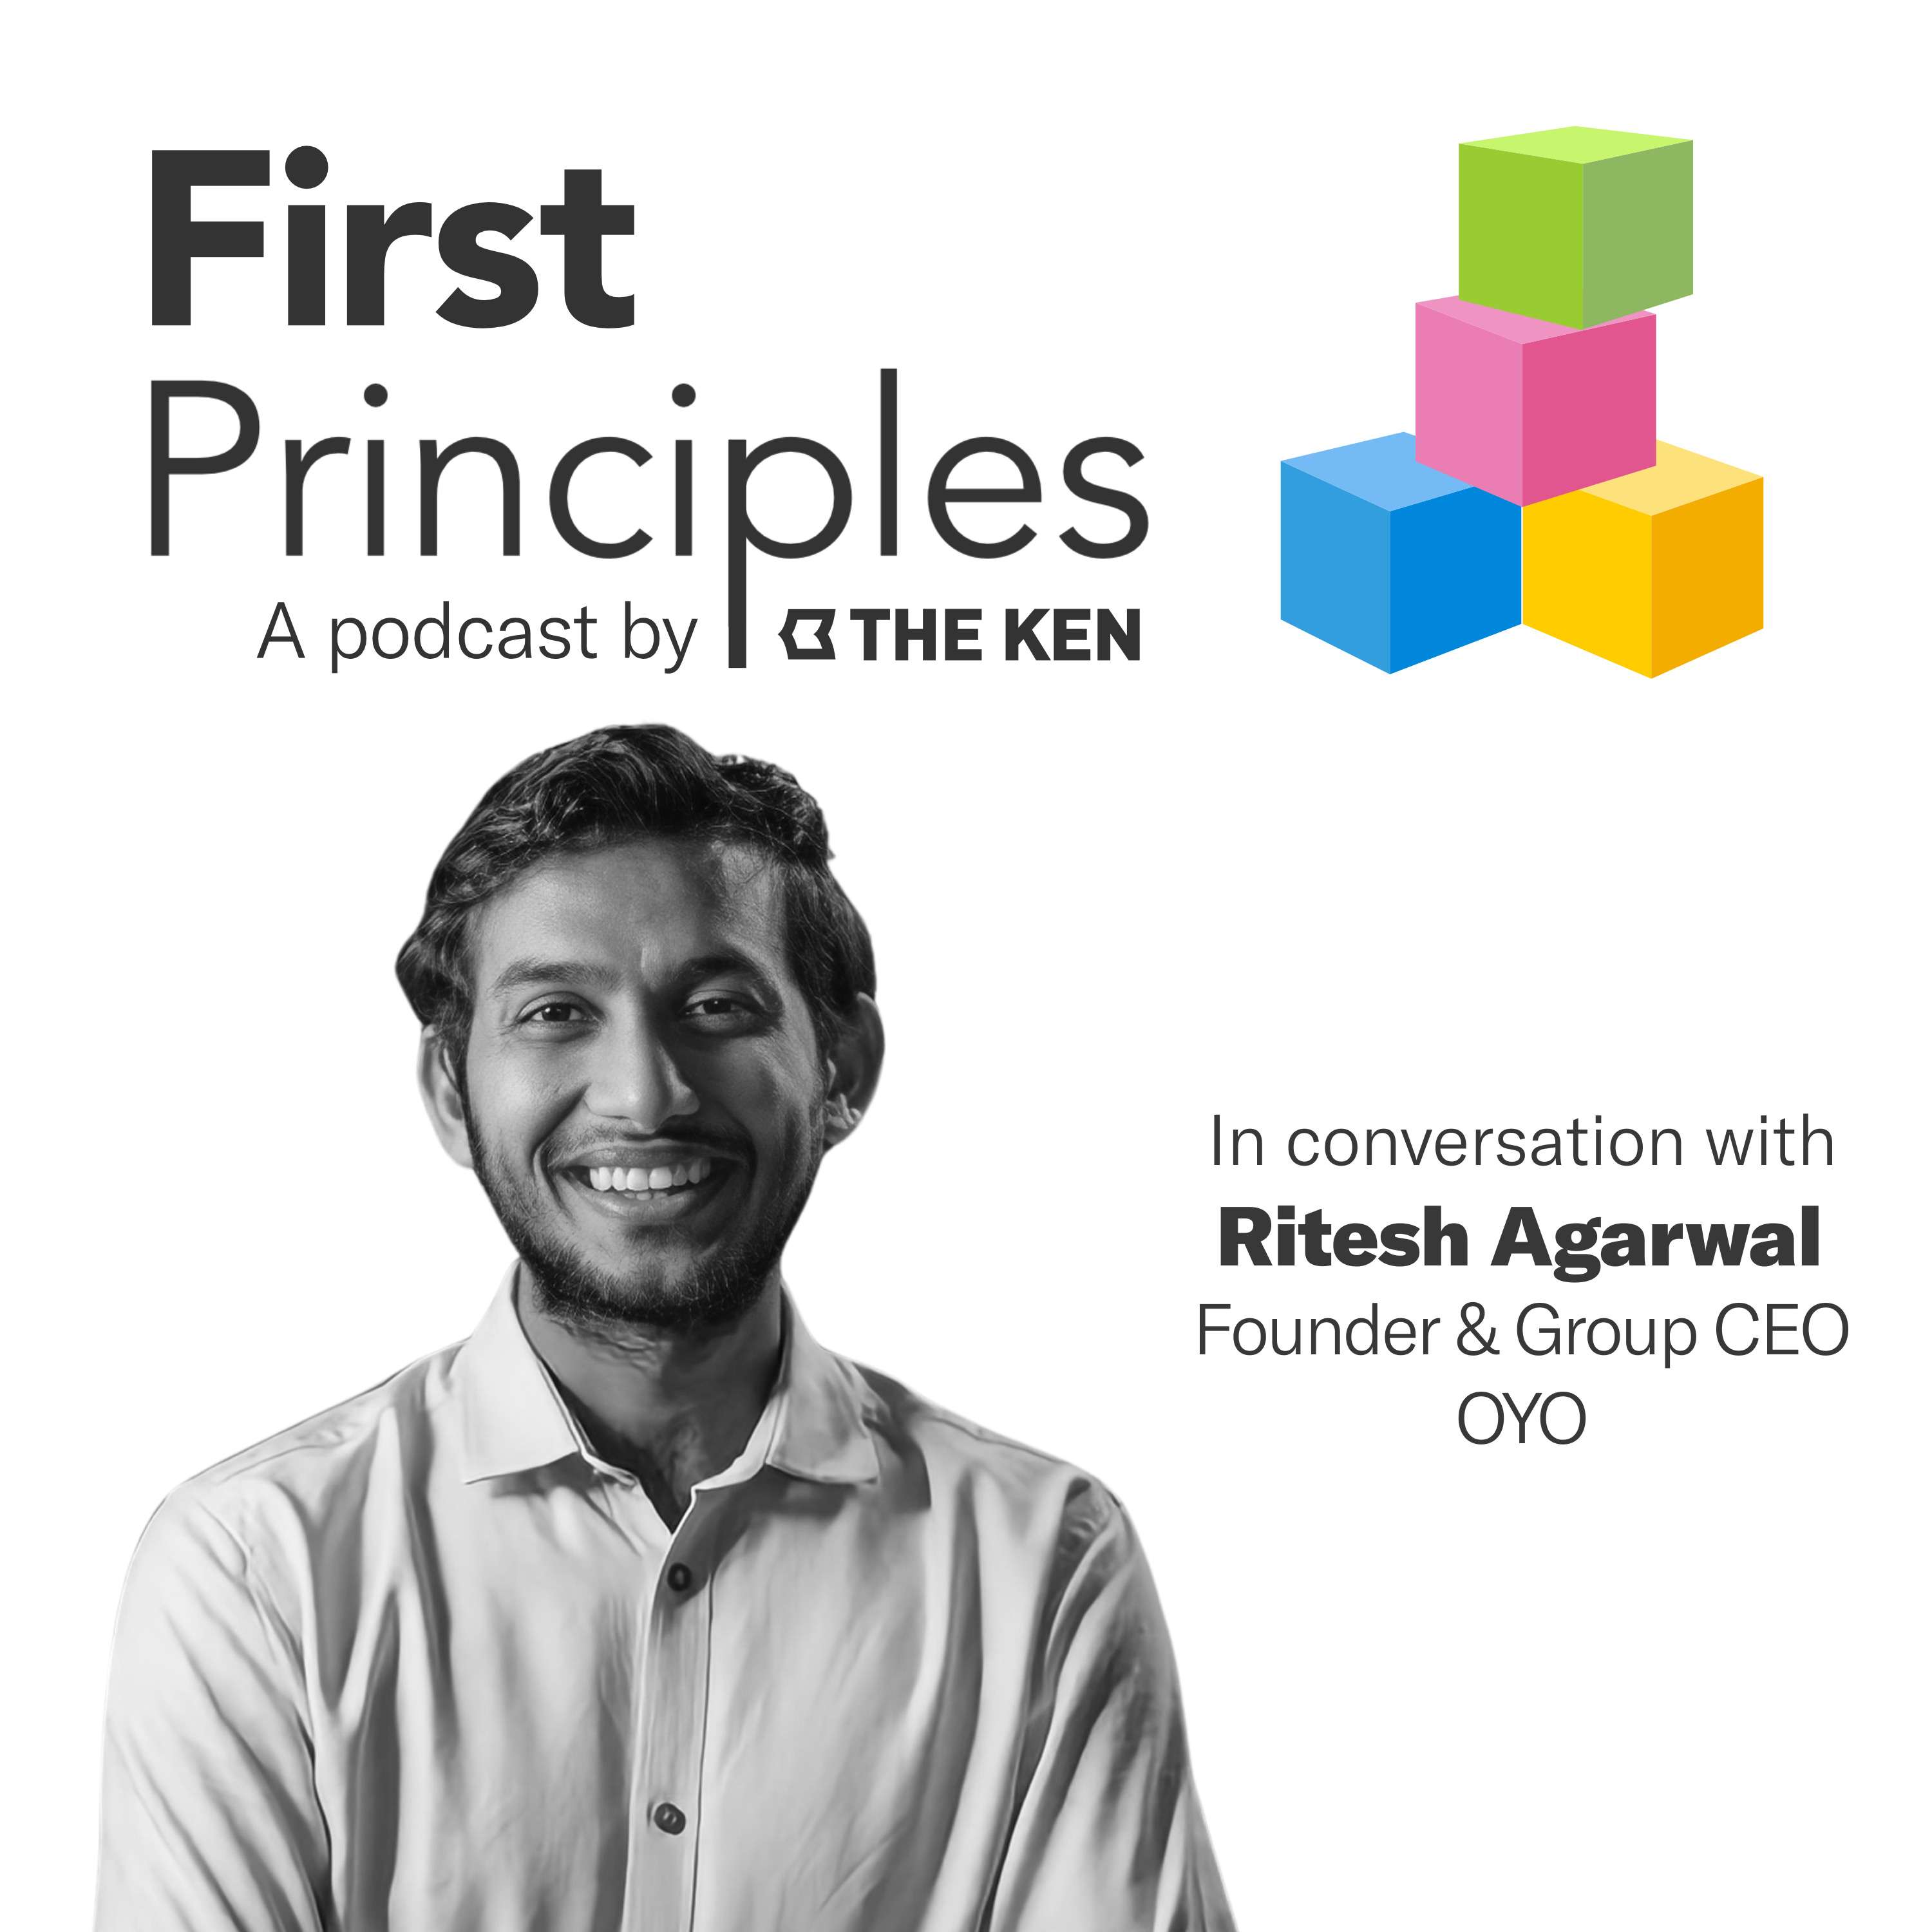 Ritesh Agarwal of OYO on building a business on differentiation, communication and resilience